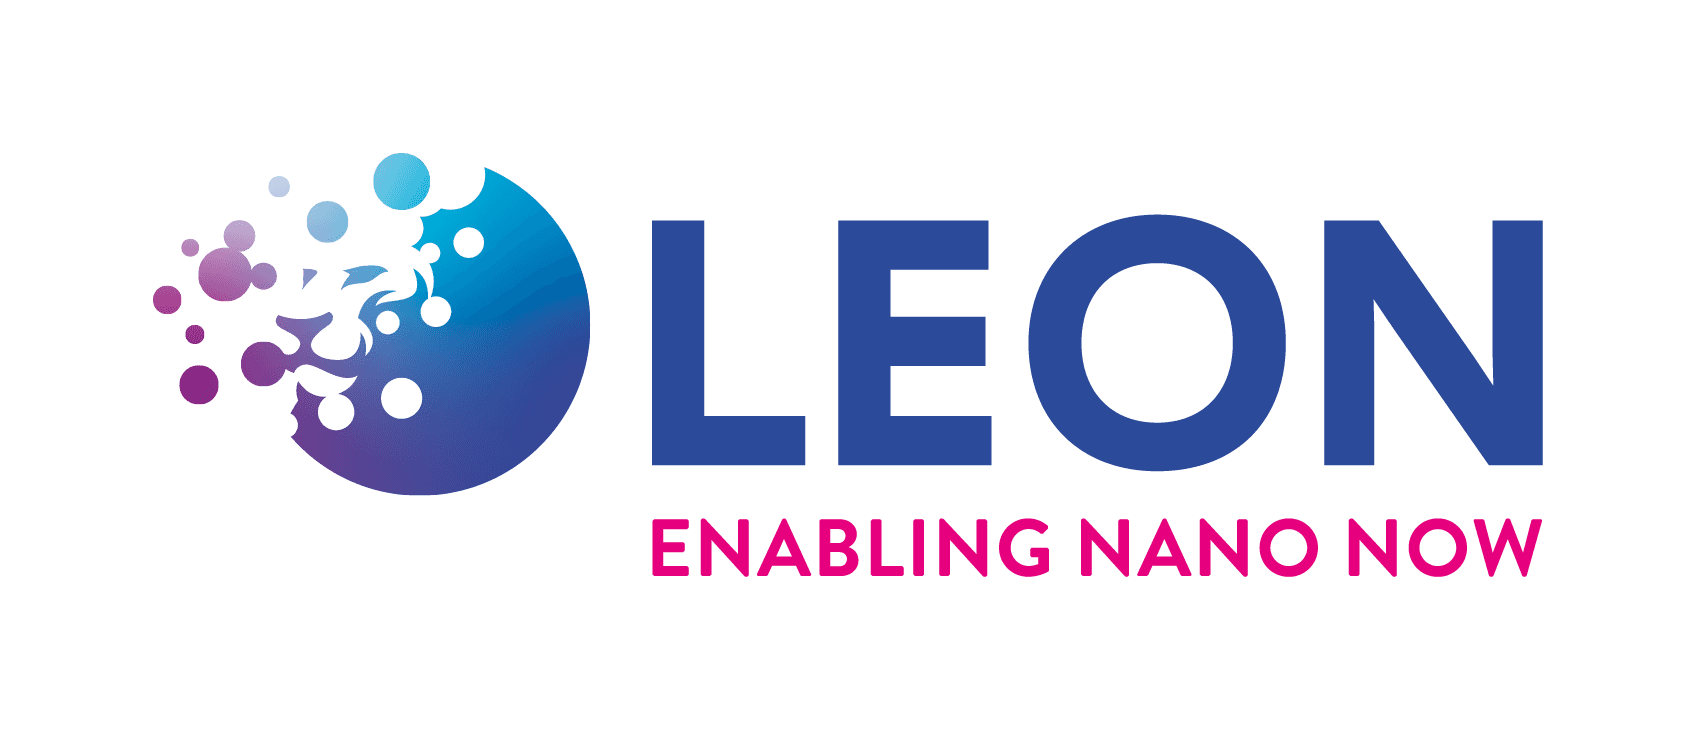 Product LEON completes development of its innovative reactor image